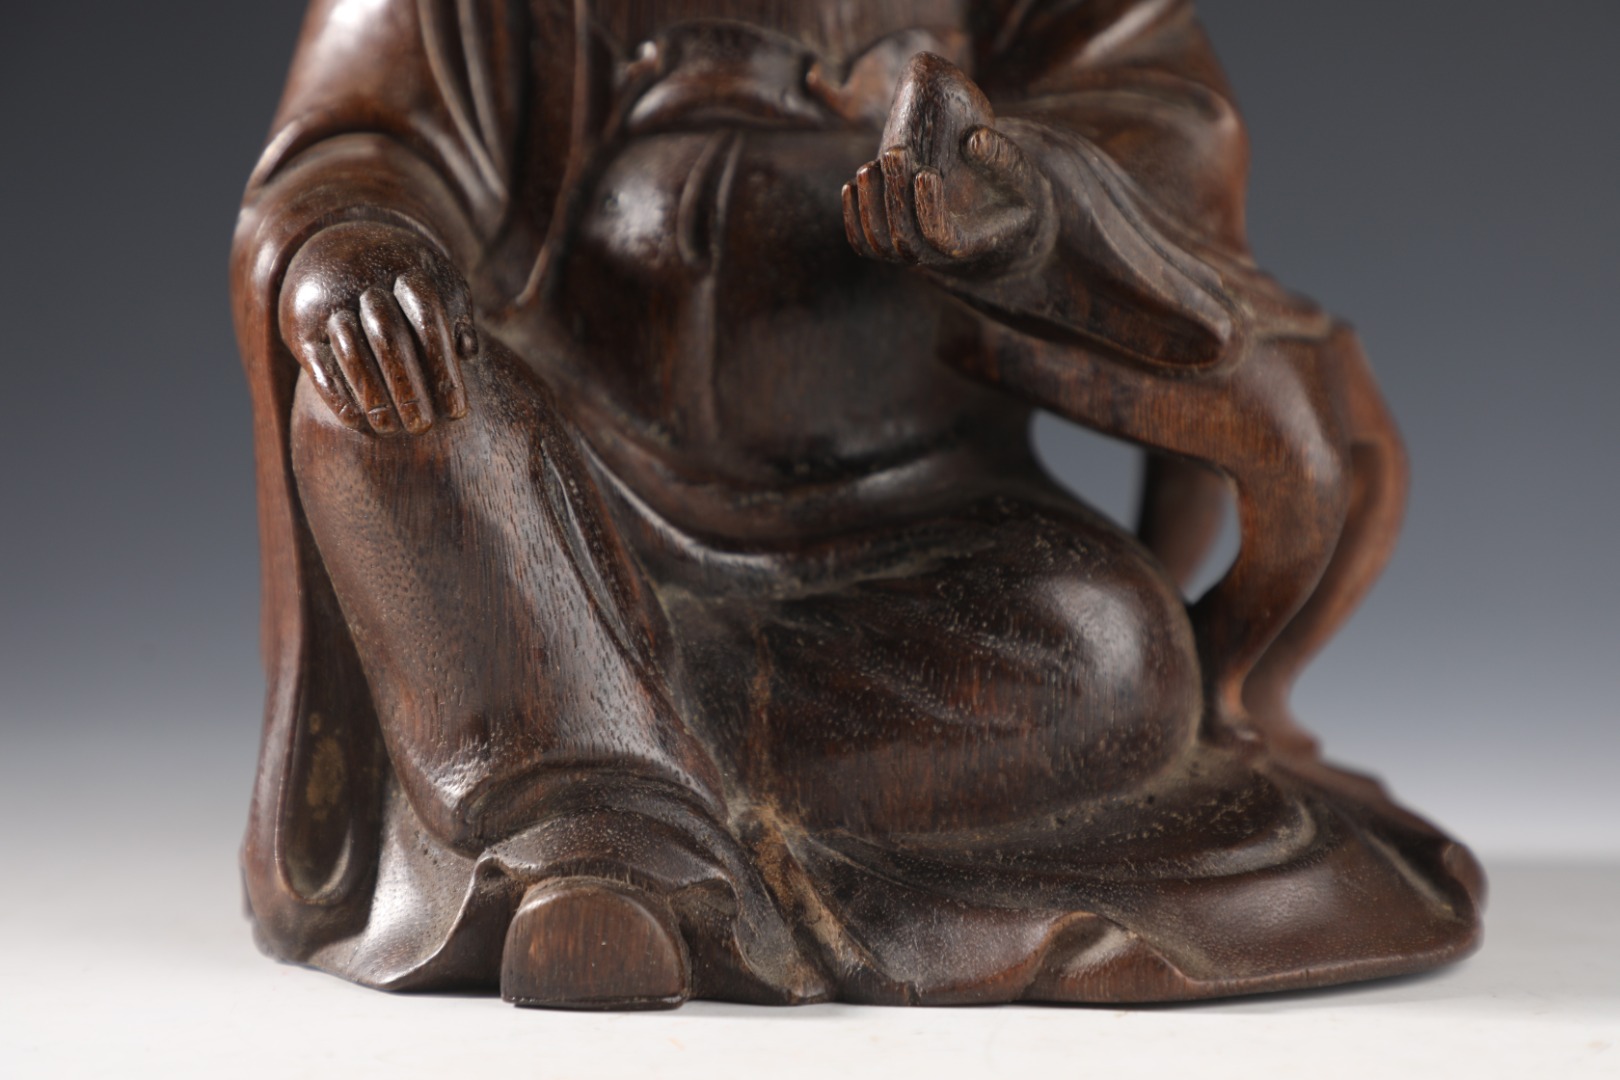 Qing Dynasty: Precious sunk old agarwood medicine fairy seated statue - Image 4 of 9